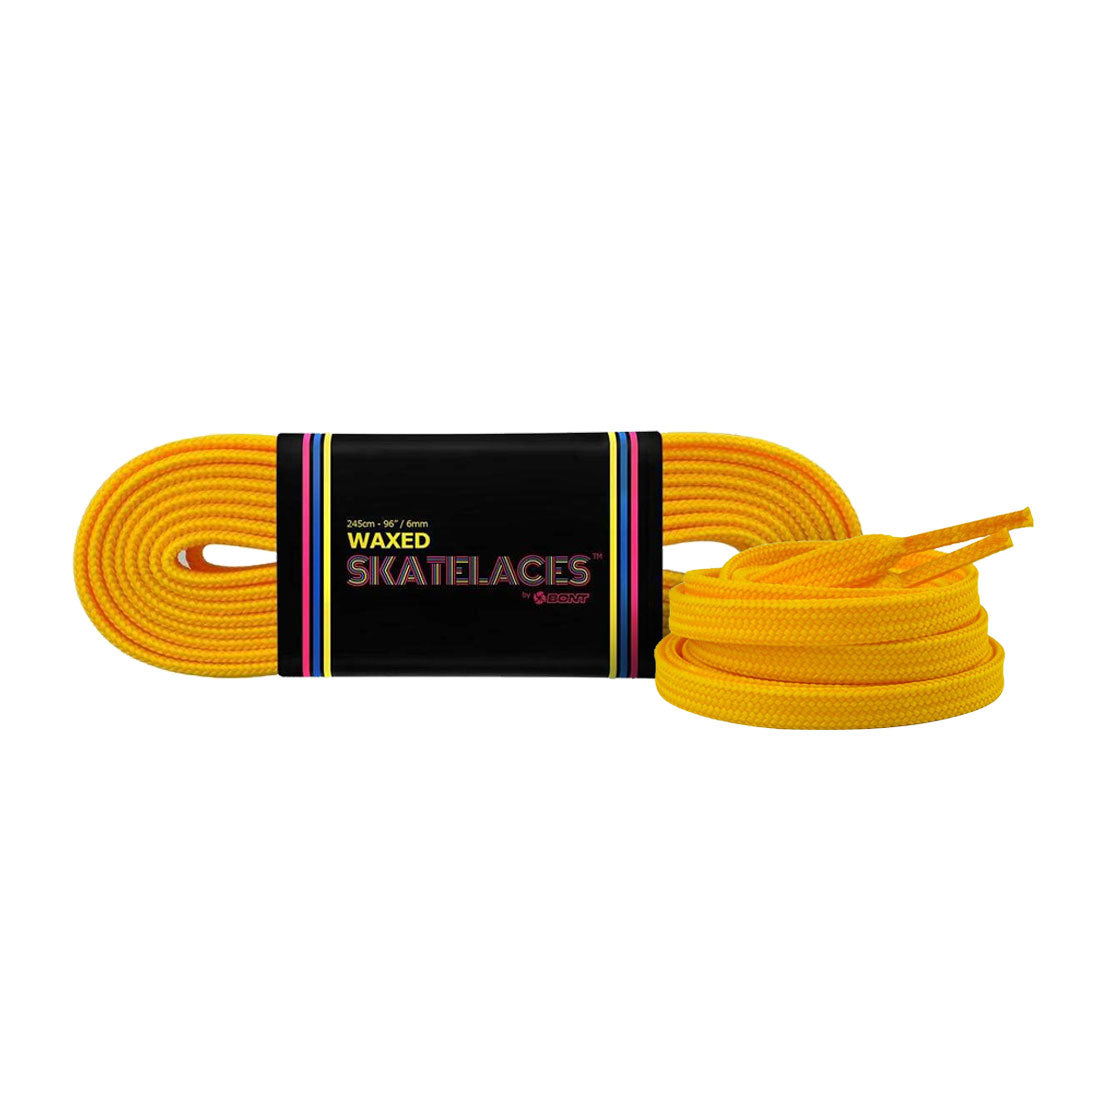 Bont Waxed 6mm Laces - 275cm/108in Bumblebee Yellow Laces